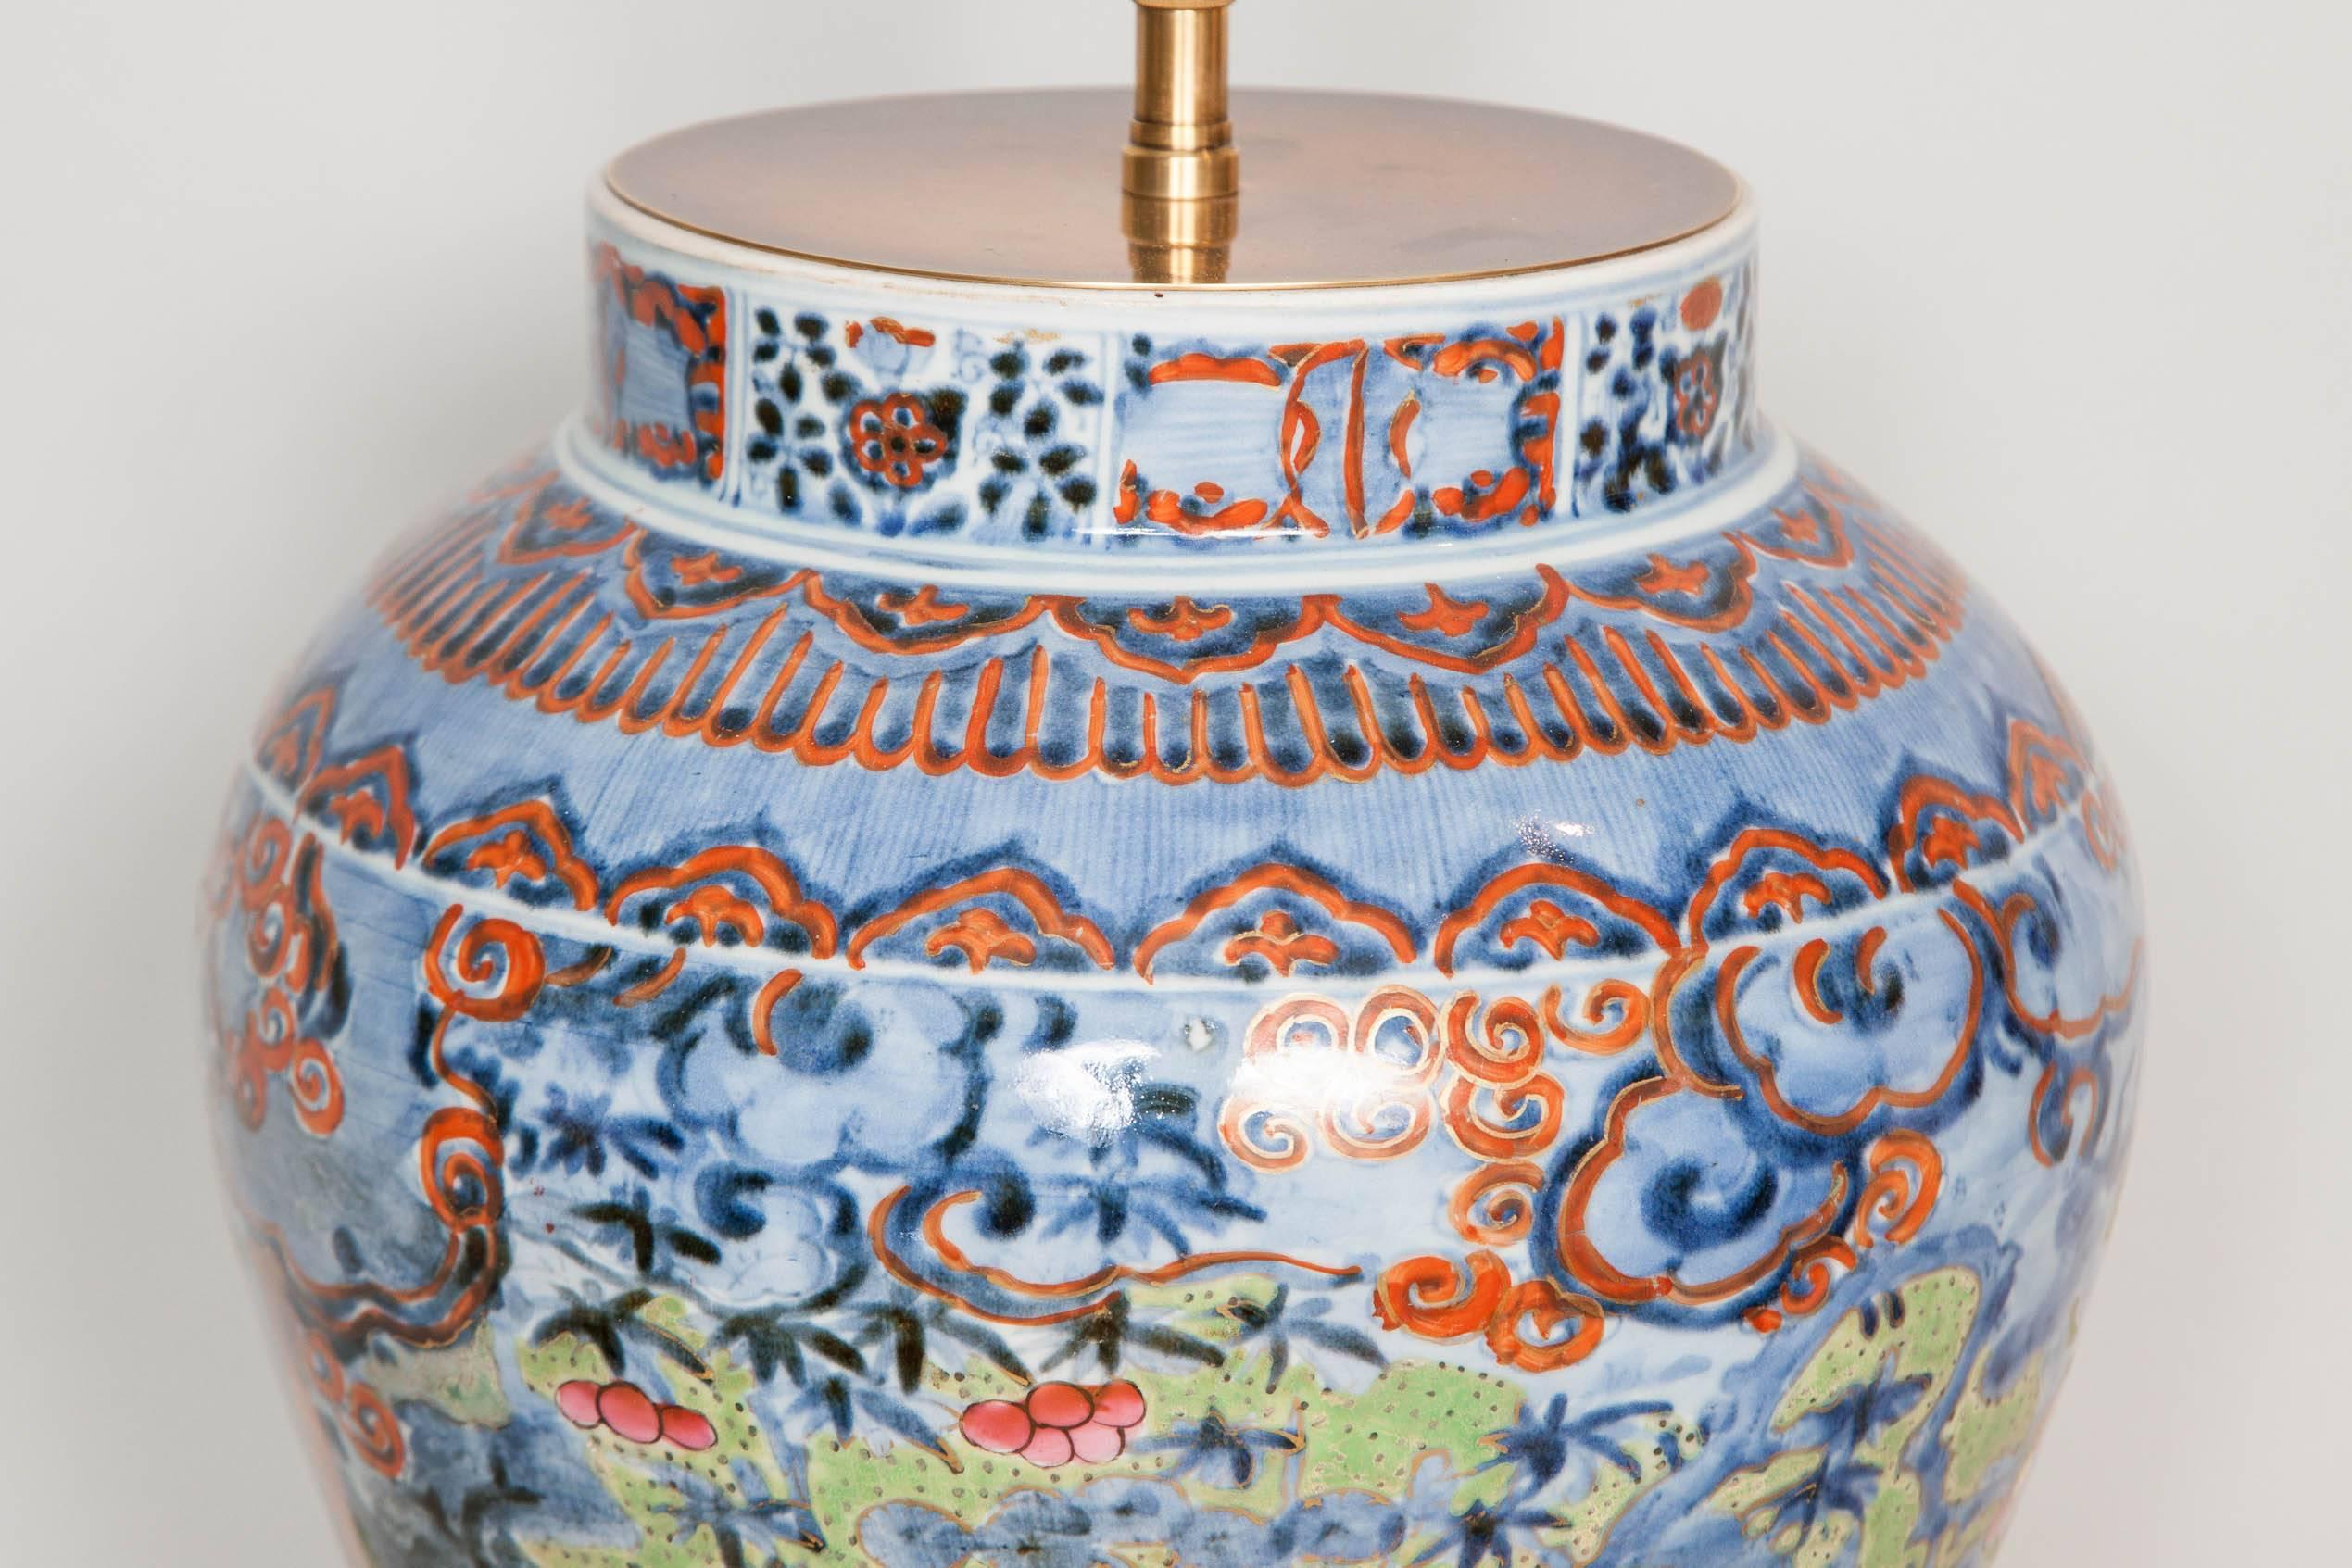 A colourful Japanese Arita vase dating from ca. 1680 which has been clobbered in Europe, possibly in Holland, in the early 18th century.
Now converted into a charming table lamp and fitted with a hand carved and gilt wood base and an antiqued brass